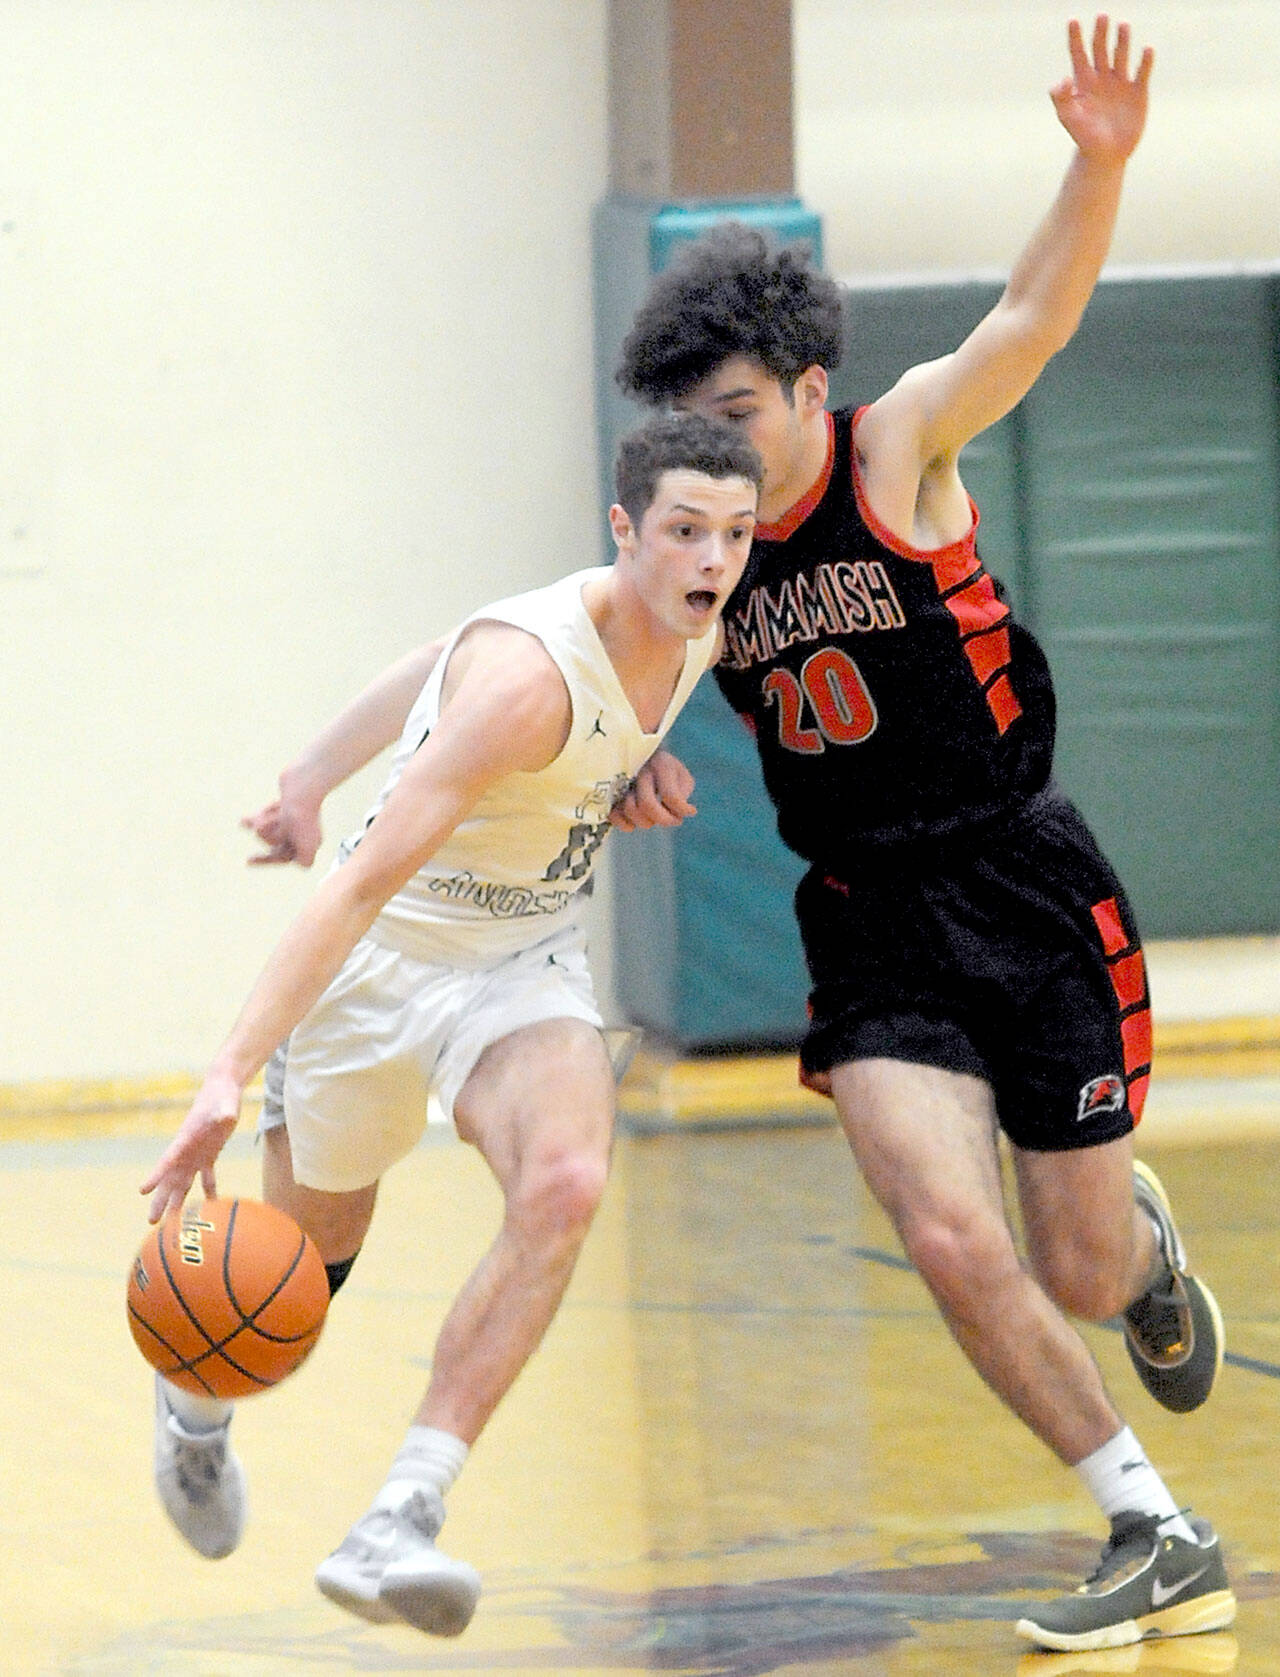 Port Angeles’ Dallas Dunning is pursued by Sammamish’s Hudson Reed during Wednesday’s game in Port Angeles. (Keith Thorpe/Peninsula Daily News)